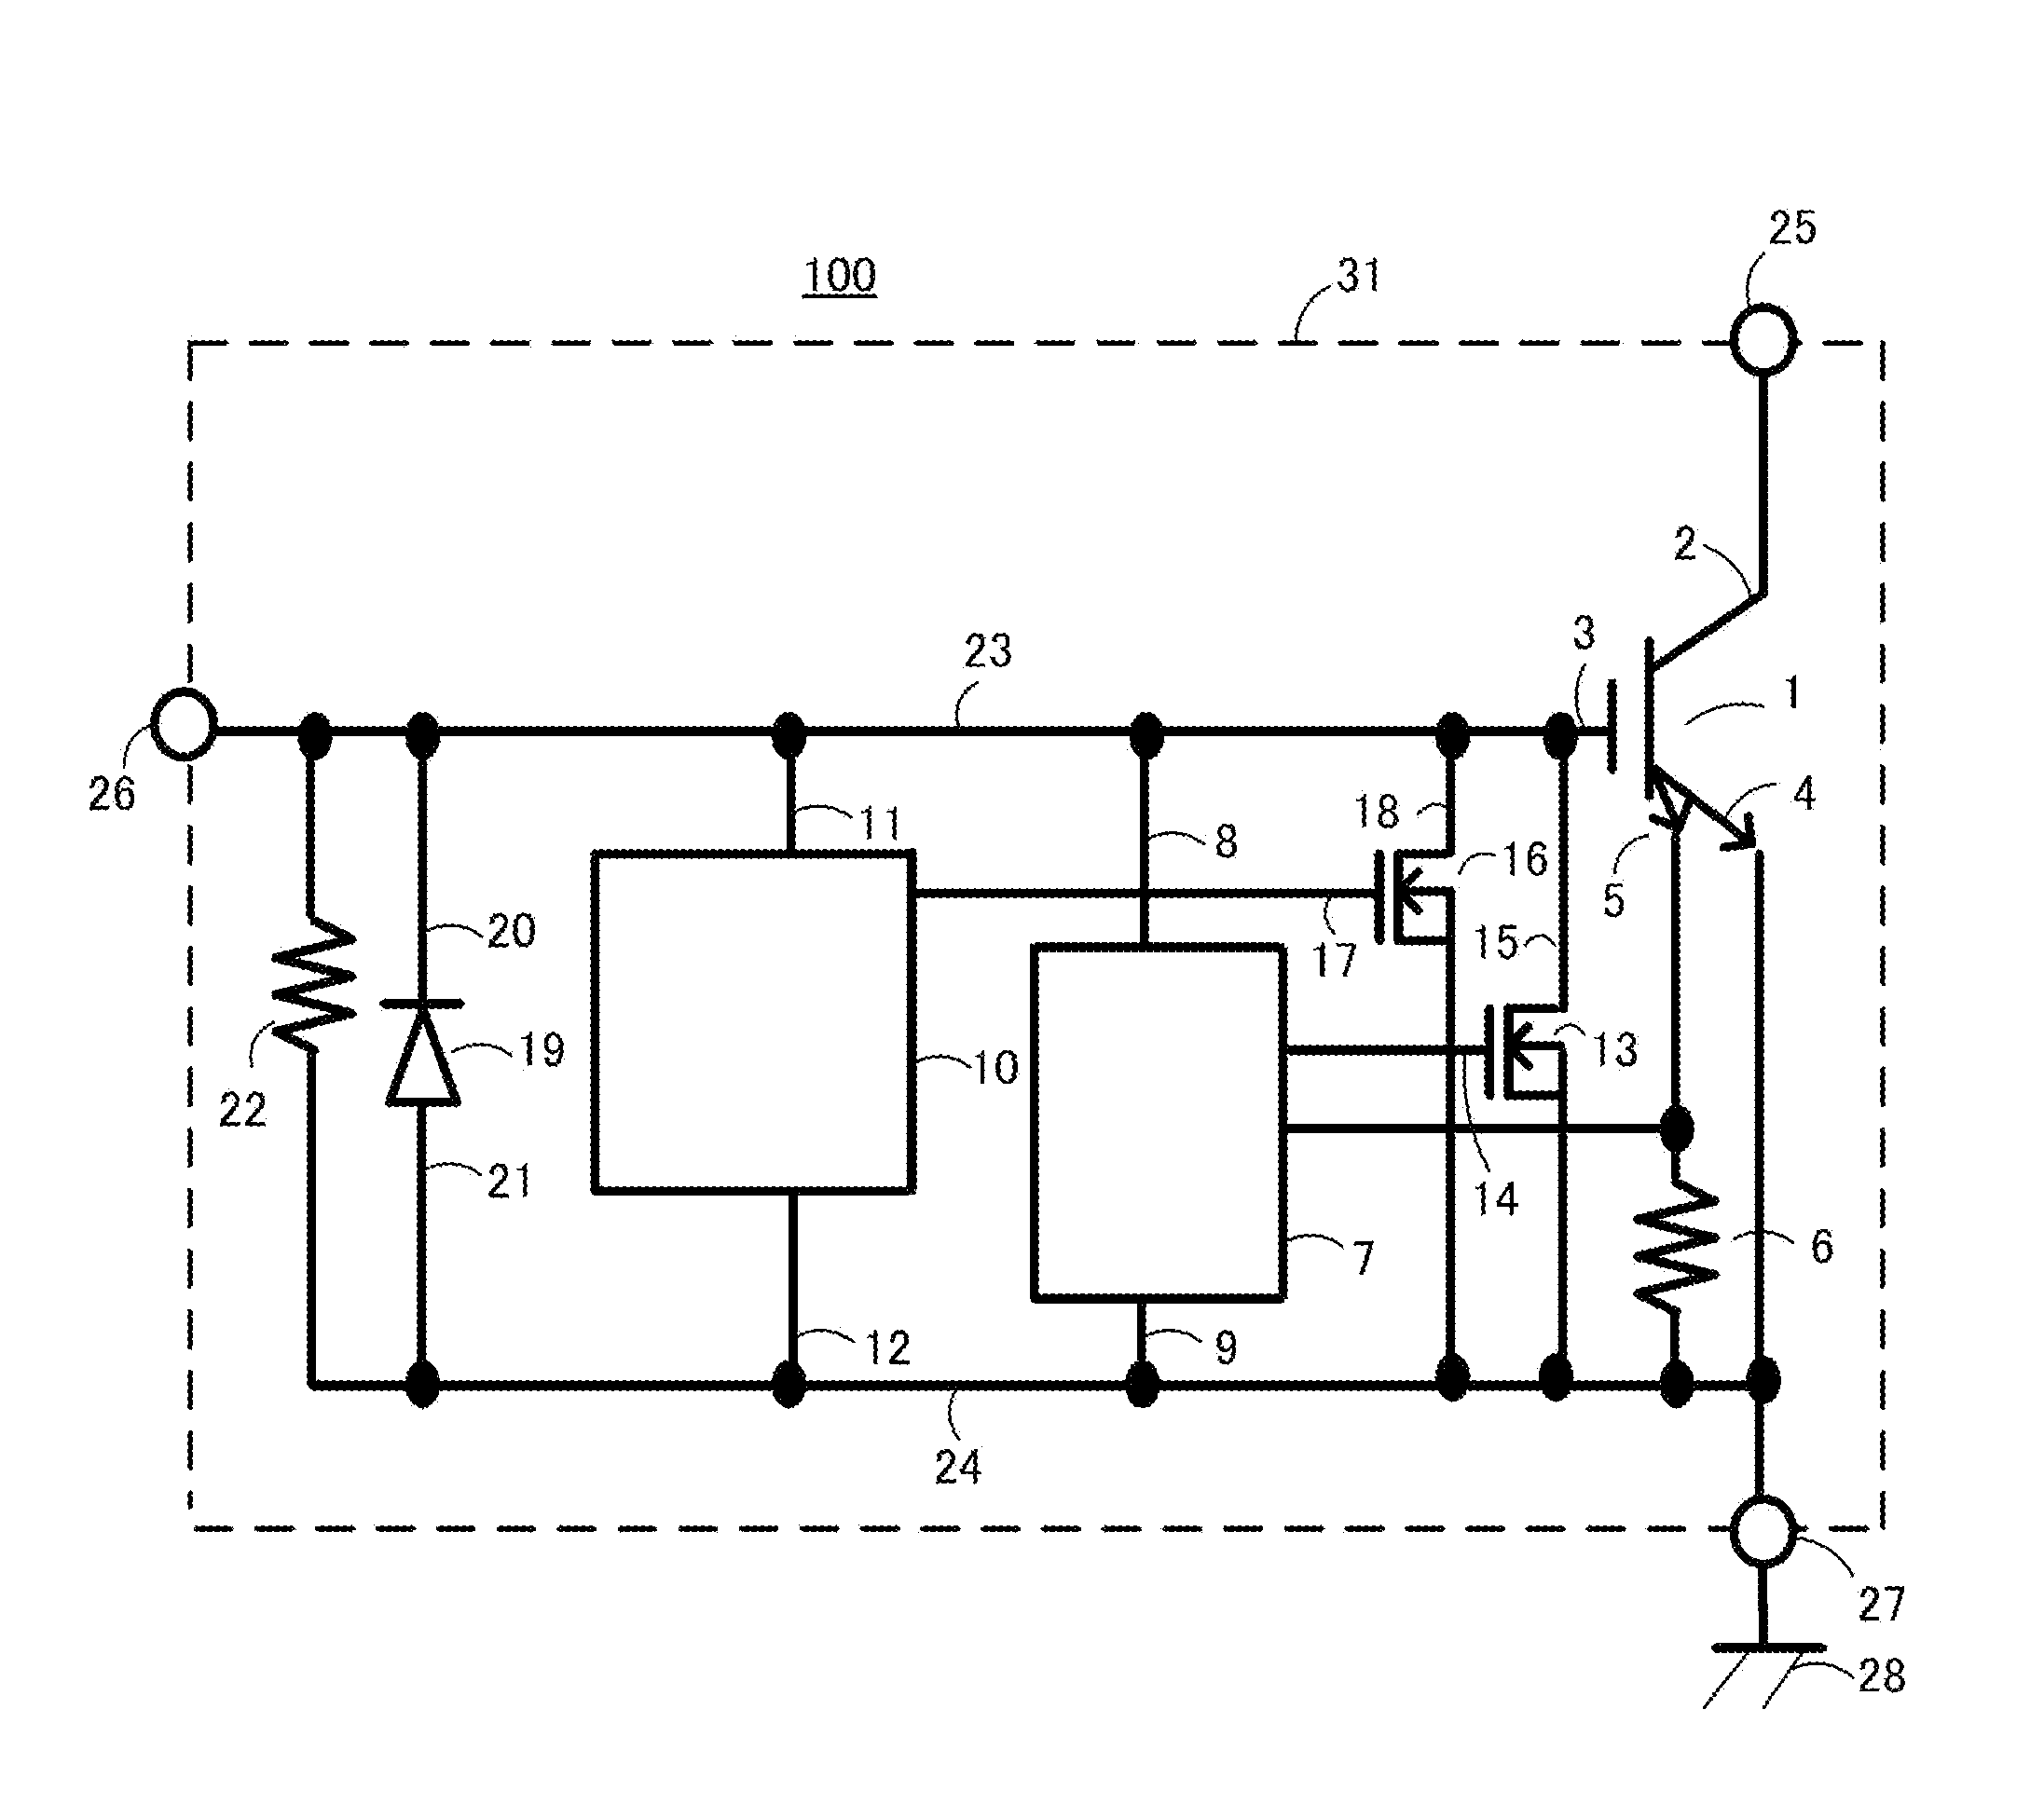 Single chip igniter and internal combustion engine ignition device